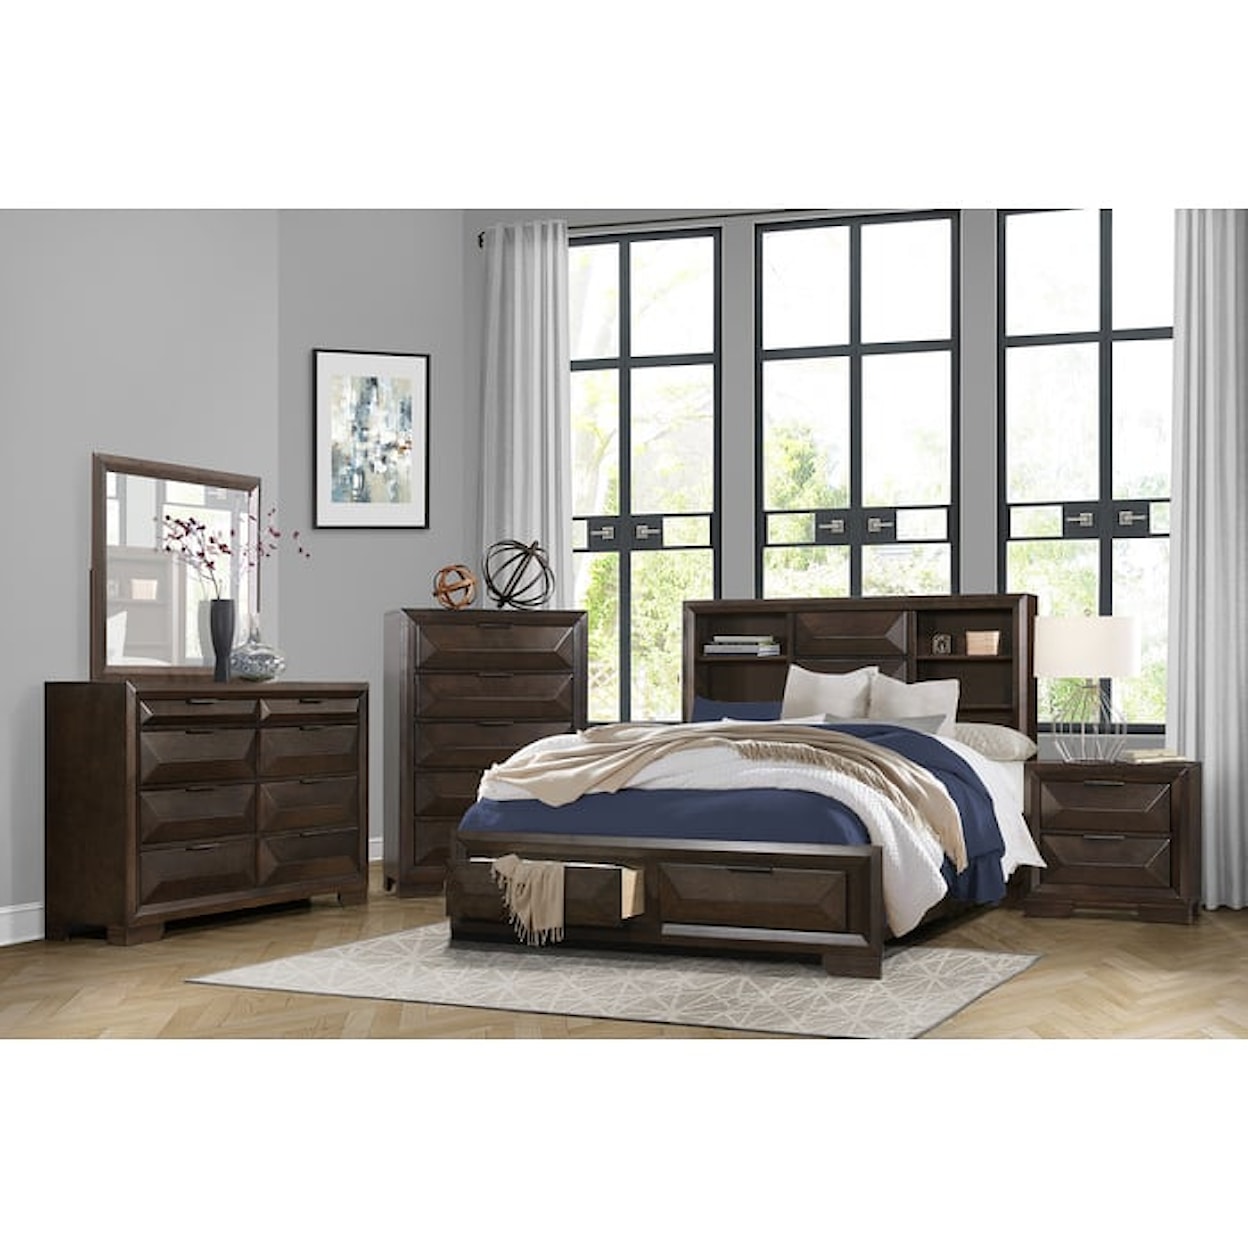 Homelegance Chesky King  Bed with FB Storage